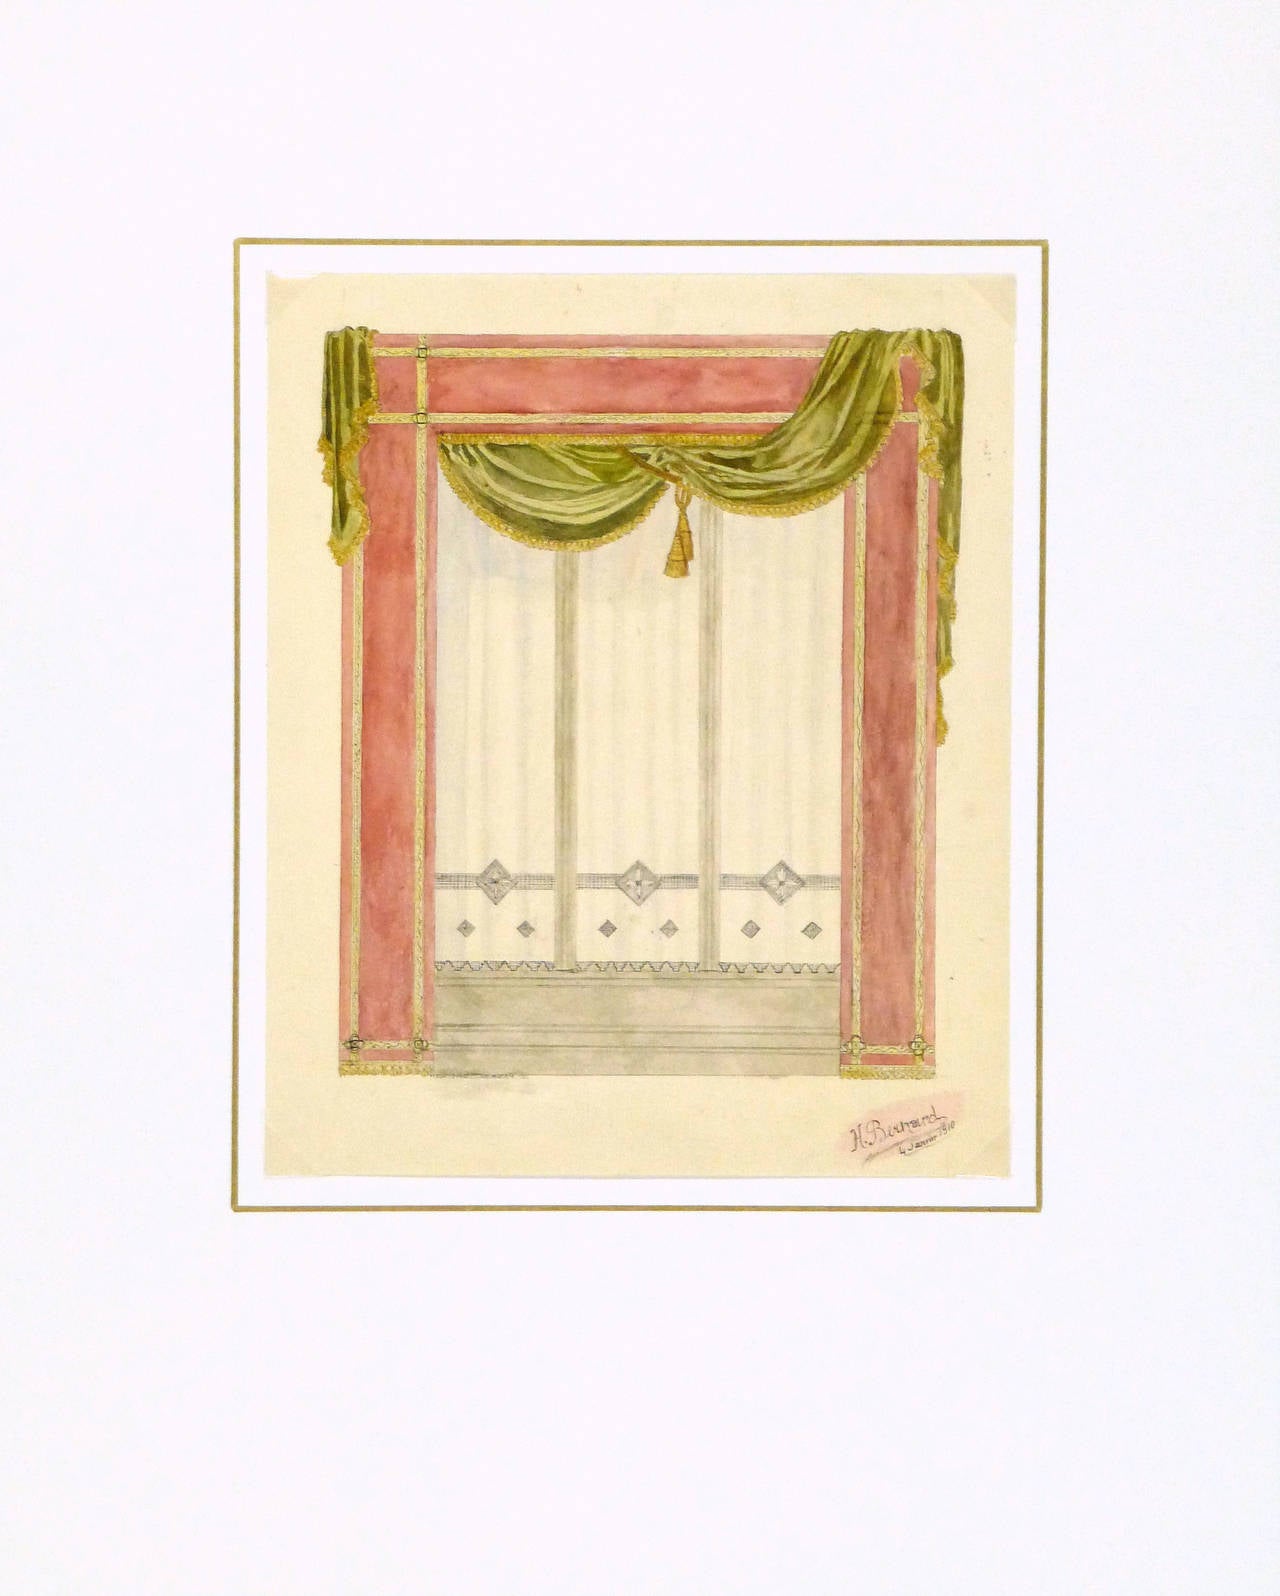 Vintage French ink and watercolor of a window dressed in rich and detailed fabrics by artist H. Bernard, 1910. Signed and dated lower right.  

Original vintage one-of-a-kind artwork on paper displayed on a white mat with a gold border. Mat fits a